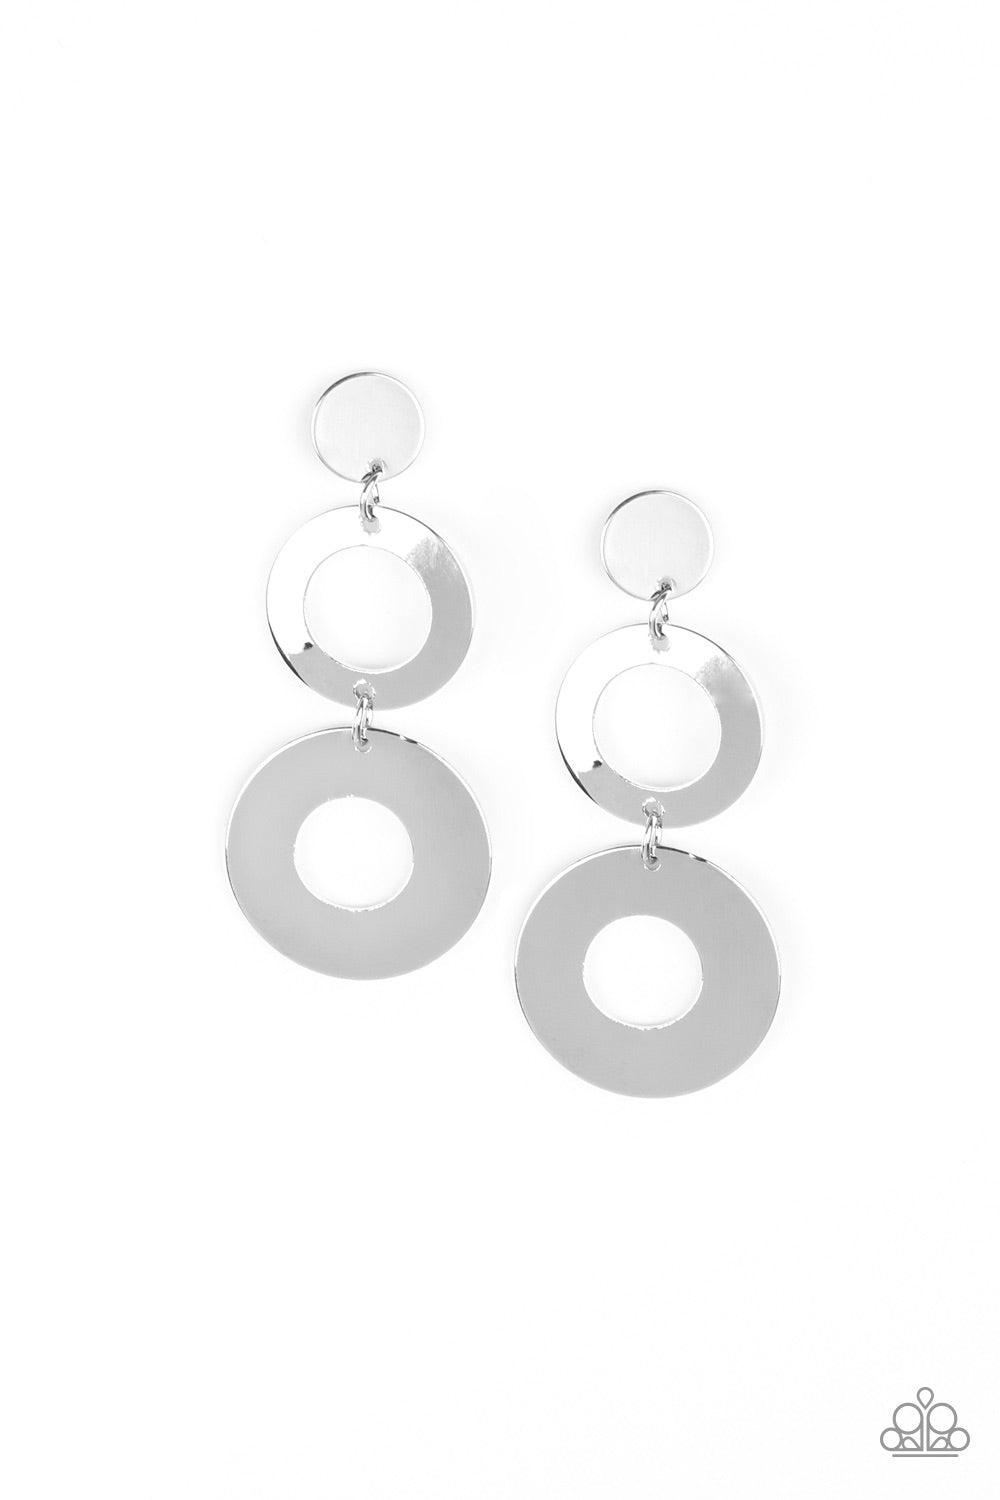 Paparazzi Accessories Pop Idol - Silver Attached to a silver fitting, glistening silver hoops link together, creating a shimmery lure. Earring attaches to a standard post fitting. Jewelry